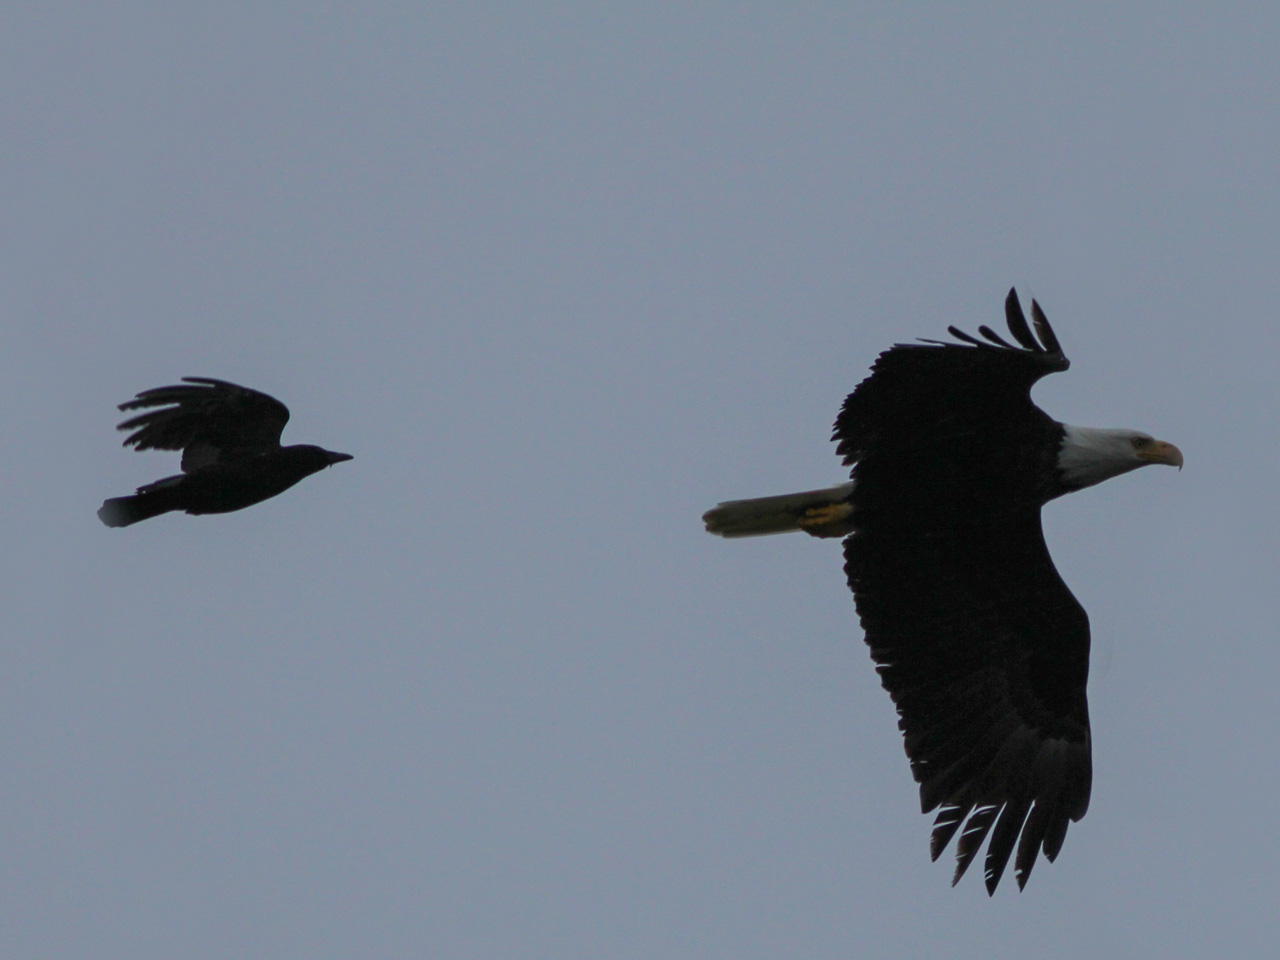 White tailed eagle and raven in silhouette showing difference in size.